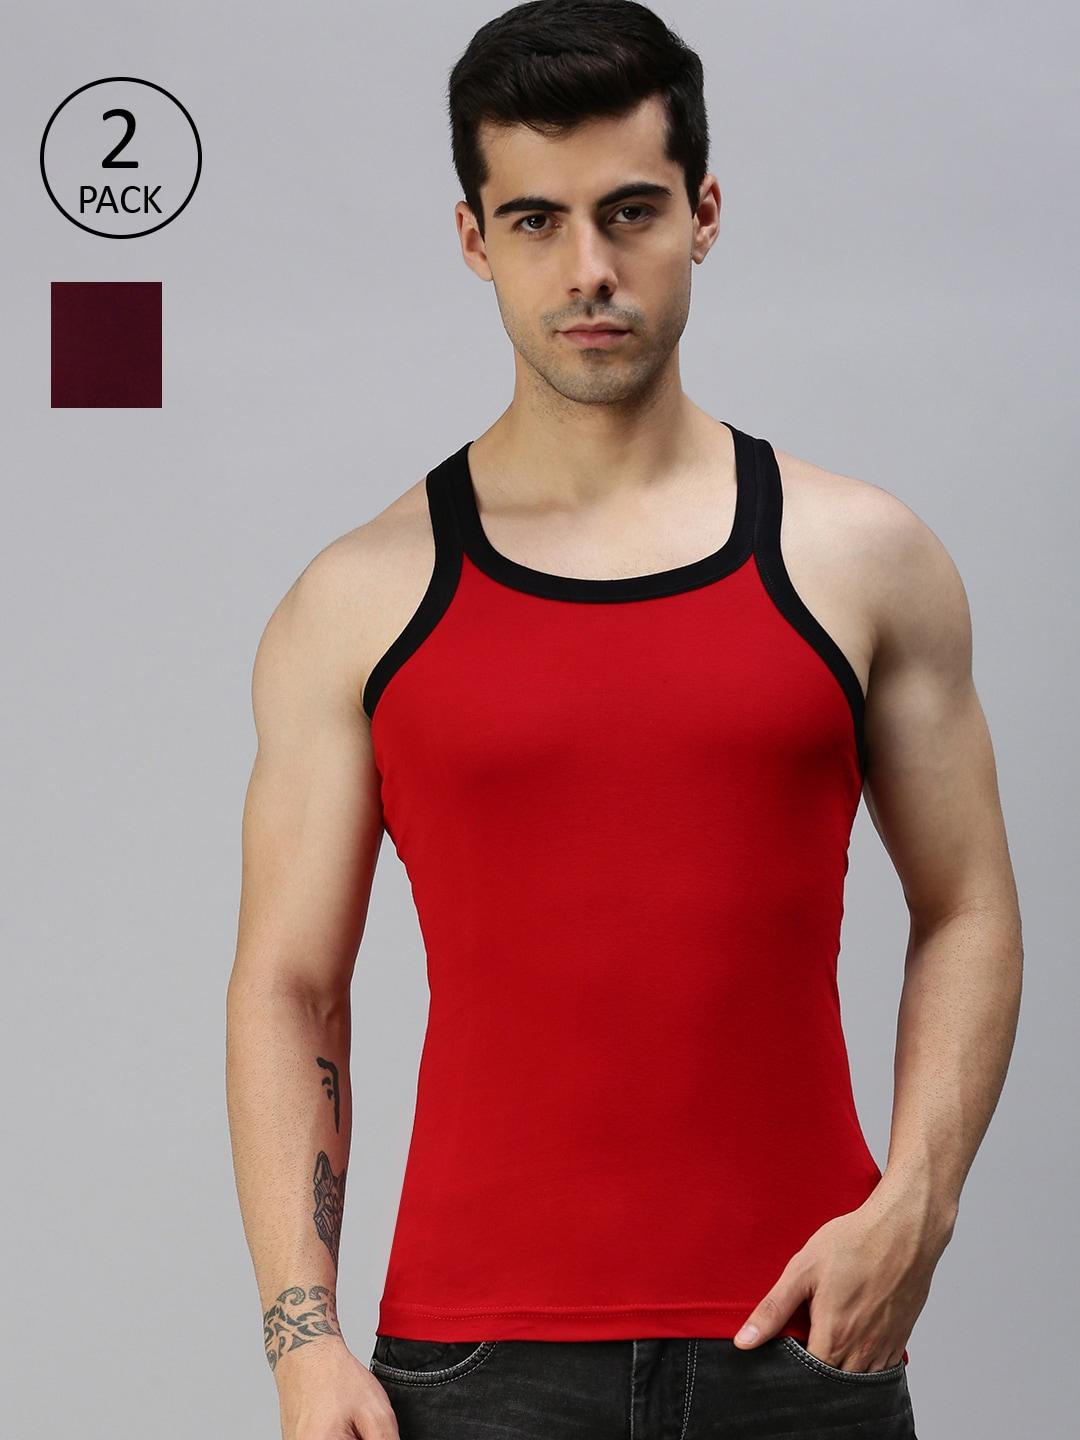 lux-cozi-men-pack-of-2-red-and-maroon-solid-cotton-innerwear-vests